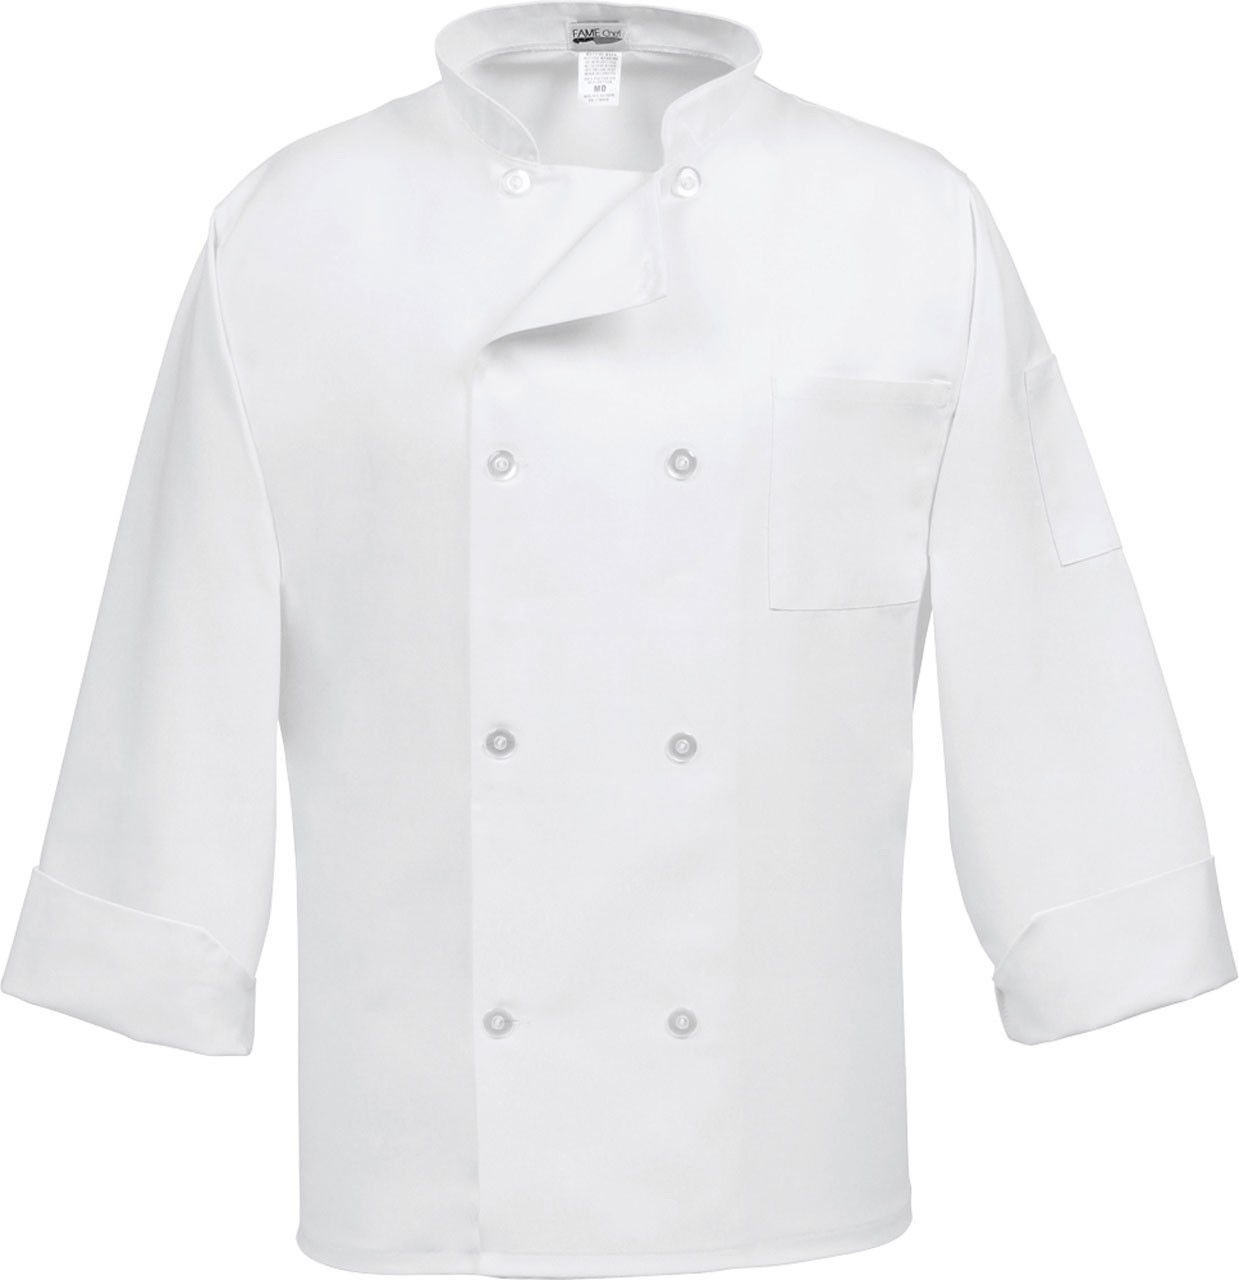 What color is the chef's coat I am about to purchase?